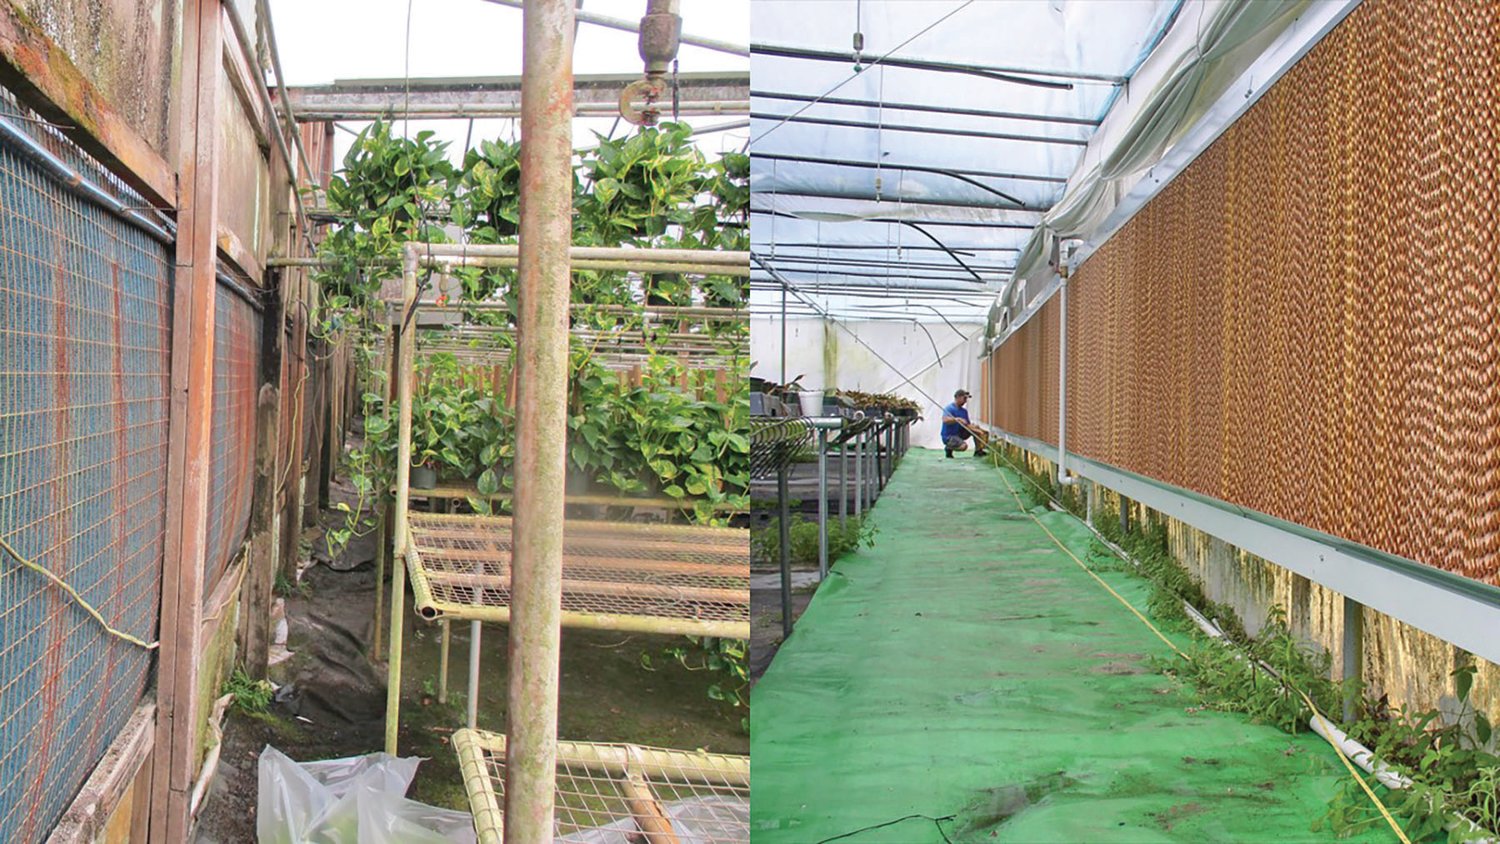 Picture on the left shows Conventional hog-hair evaporative cooling pad with no water recycling system. Picture on the right shows new, efficient cellulose evaporative cooling pad with water recycling system.